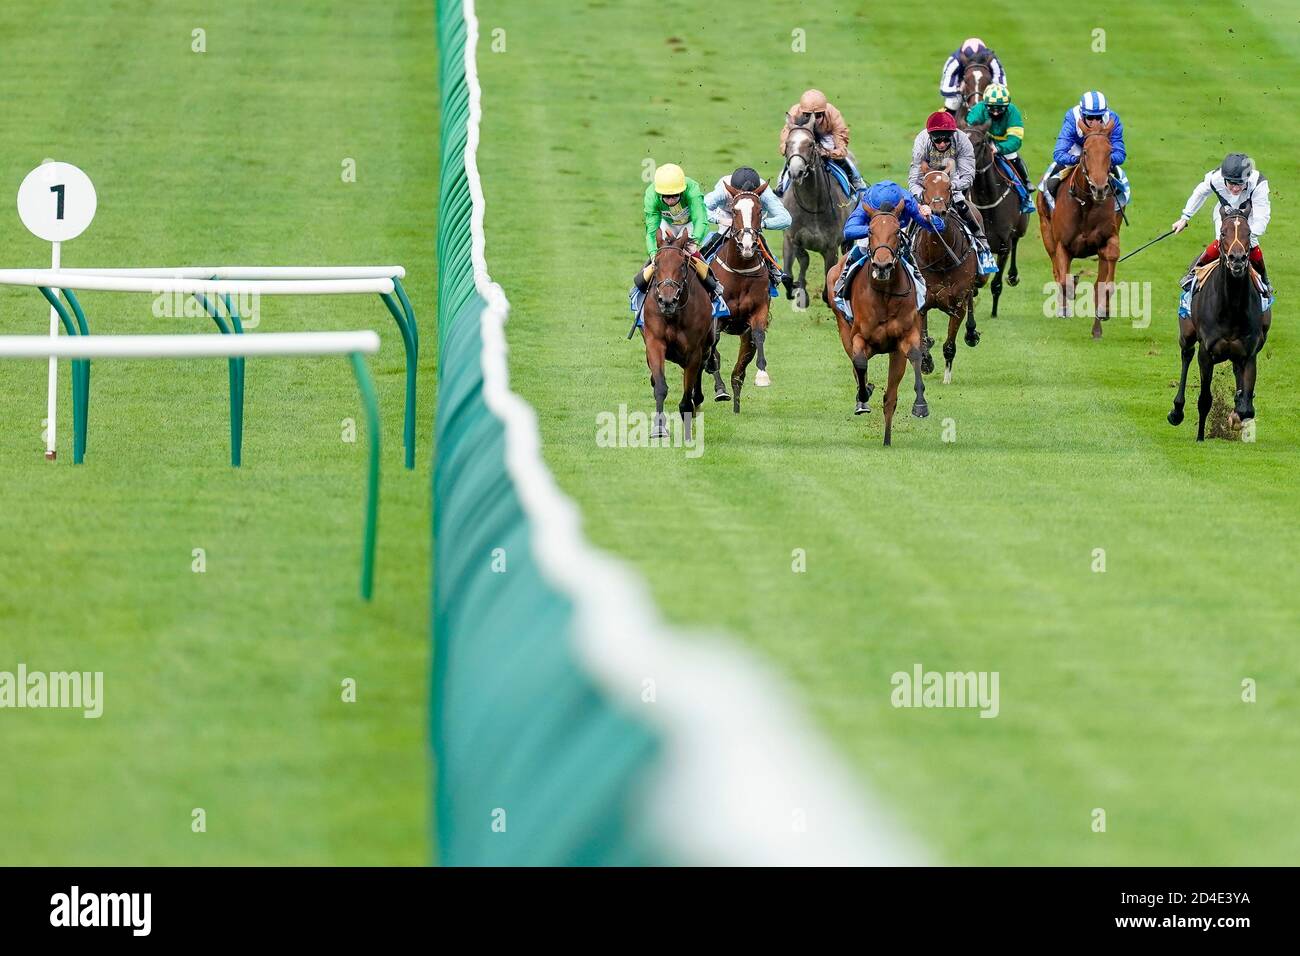 Divine Light ridden by William Buick (blue cap) wins The Godolphin Under Starters Orders Maiden Fillies' Stakes at Newmarket Racecourse. Stock Photo